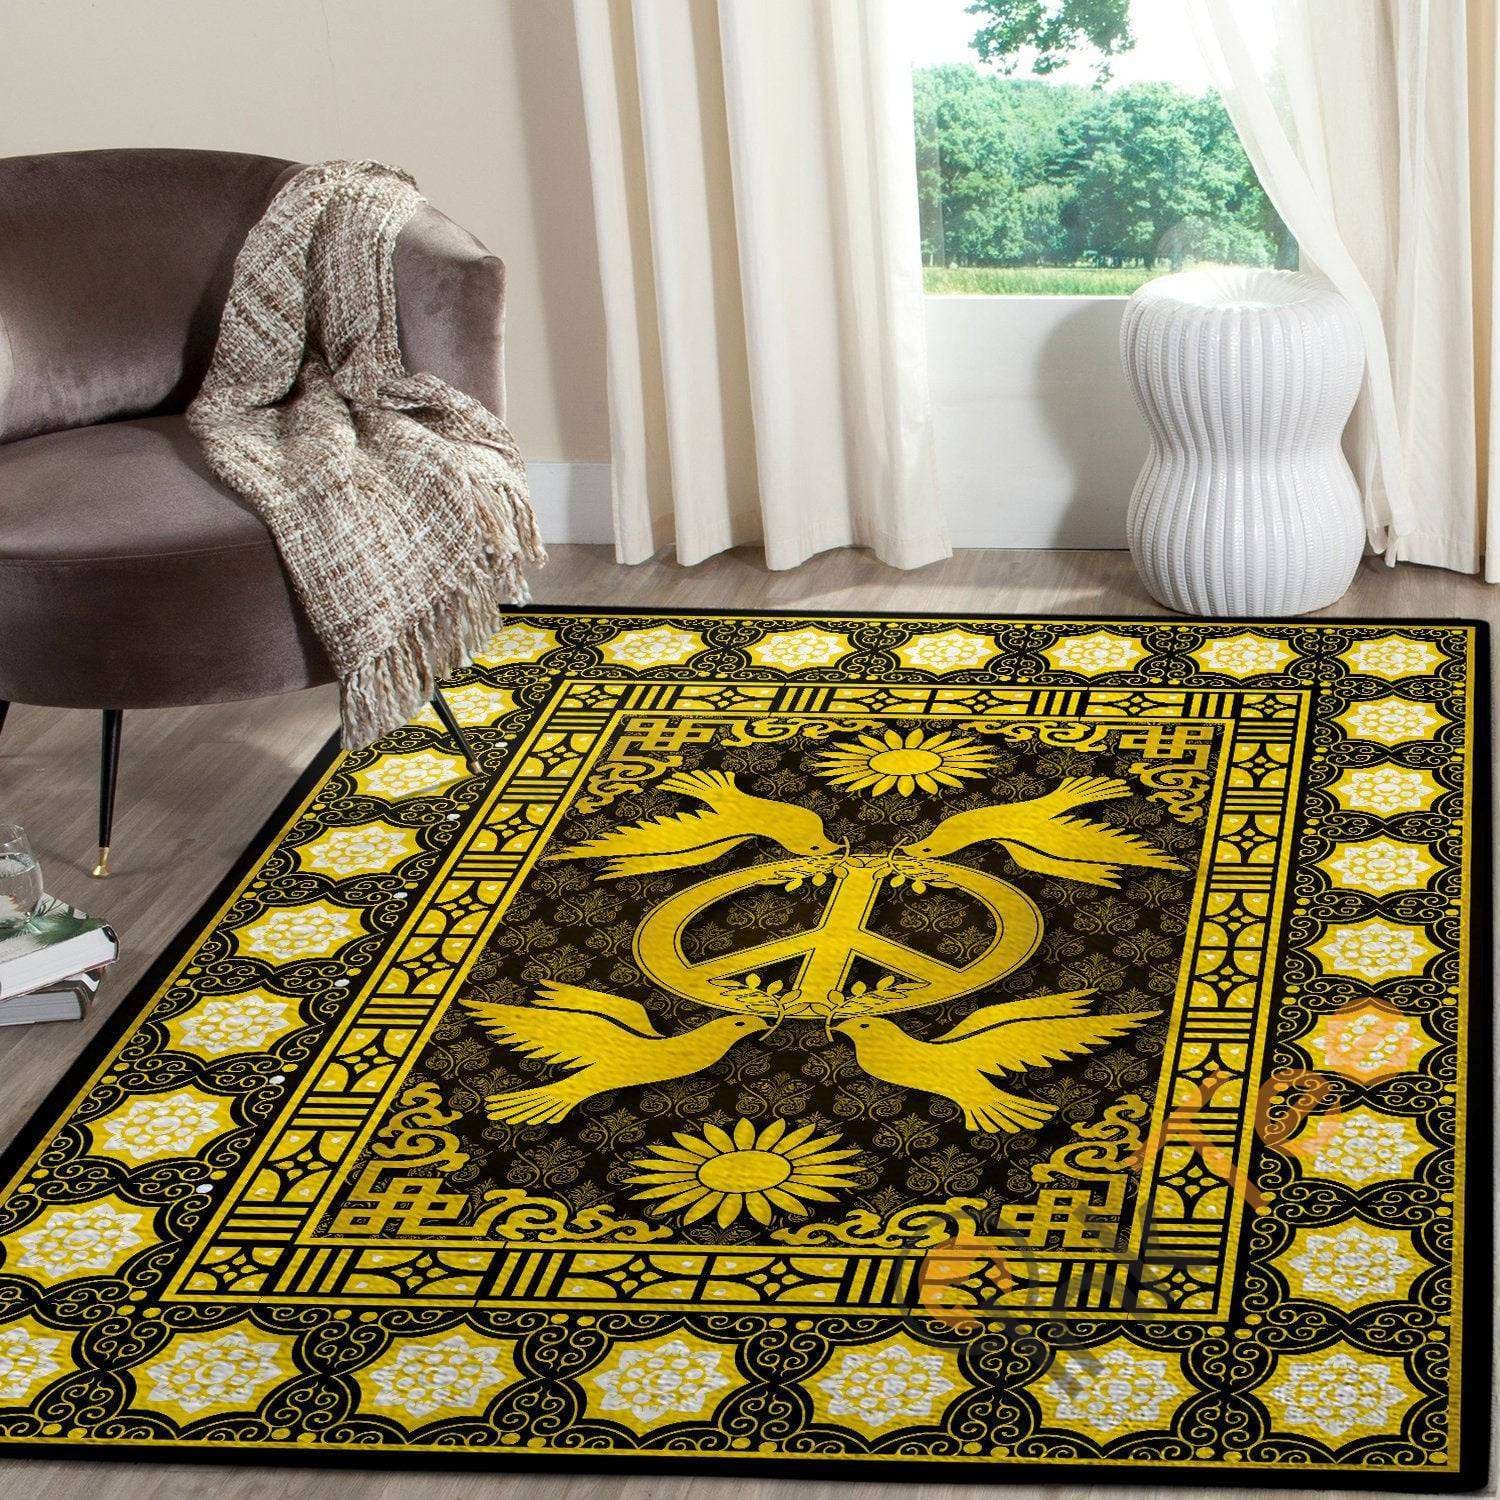 The Combination Of Sunflowers Peace Sign And Doves Hippie Mandala Sun Soft Living Room Carpet Rug